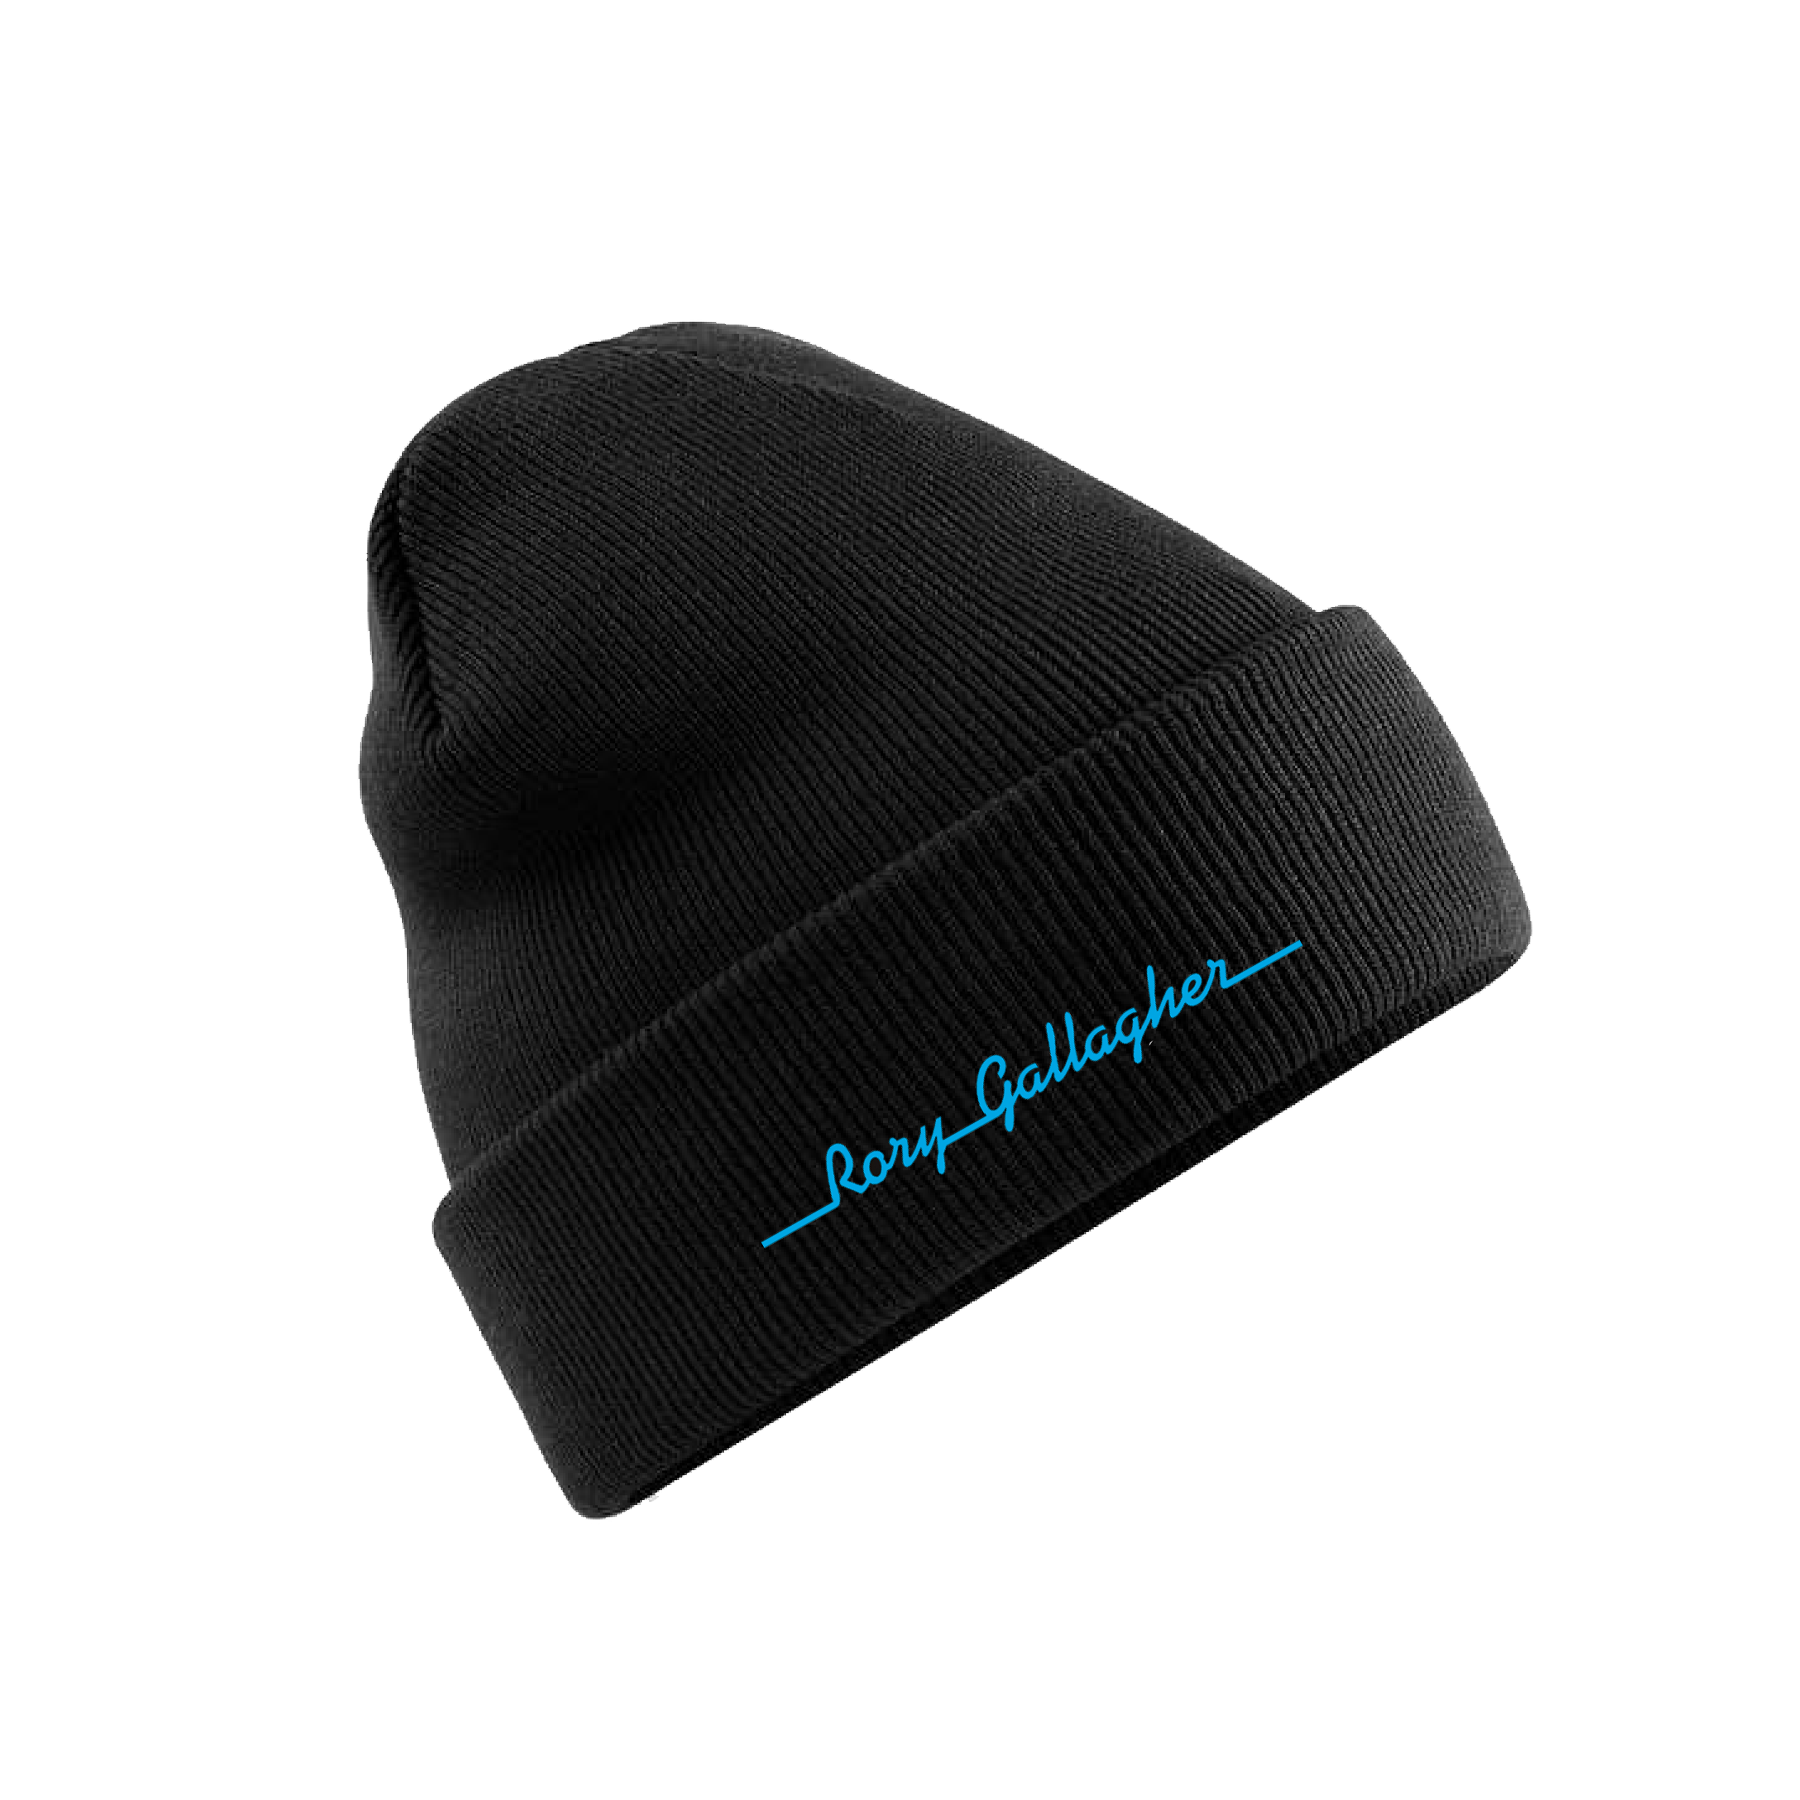 Rory Gallagher - Rory Gallagher - Official Beanie with electric blue 'Stage Struck' era font